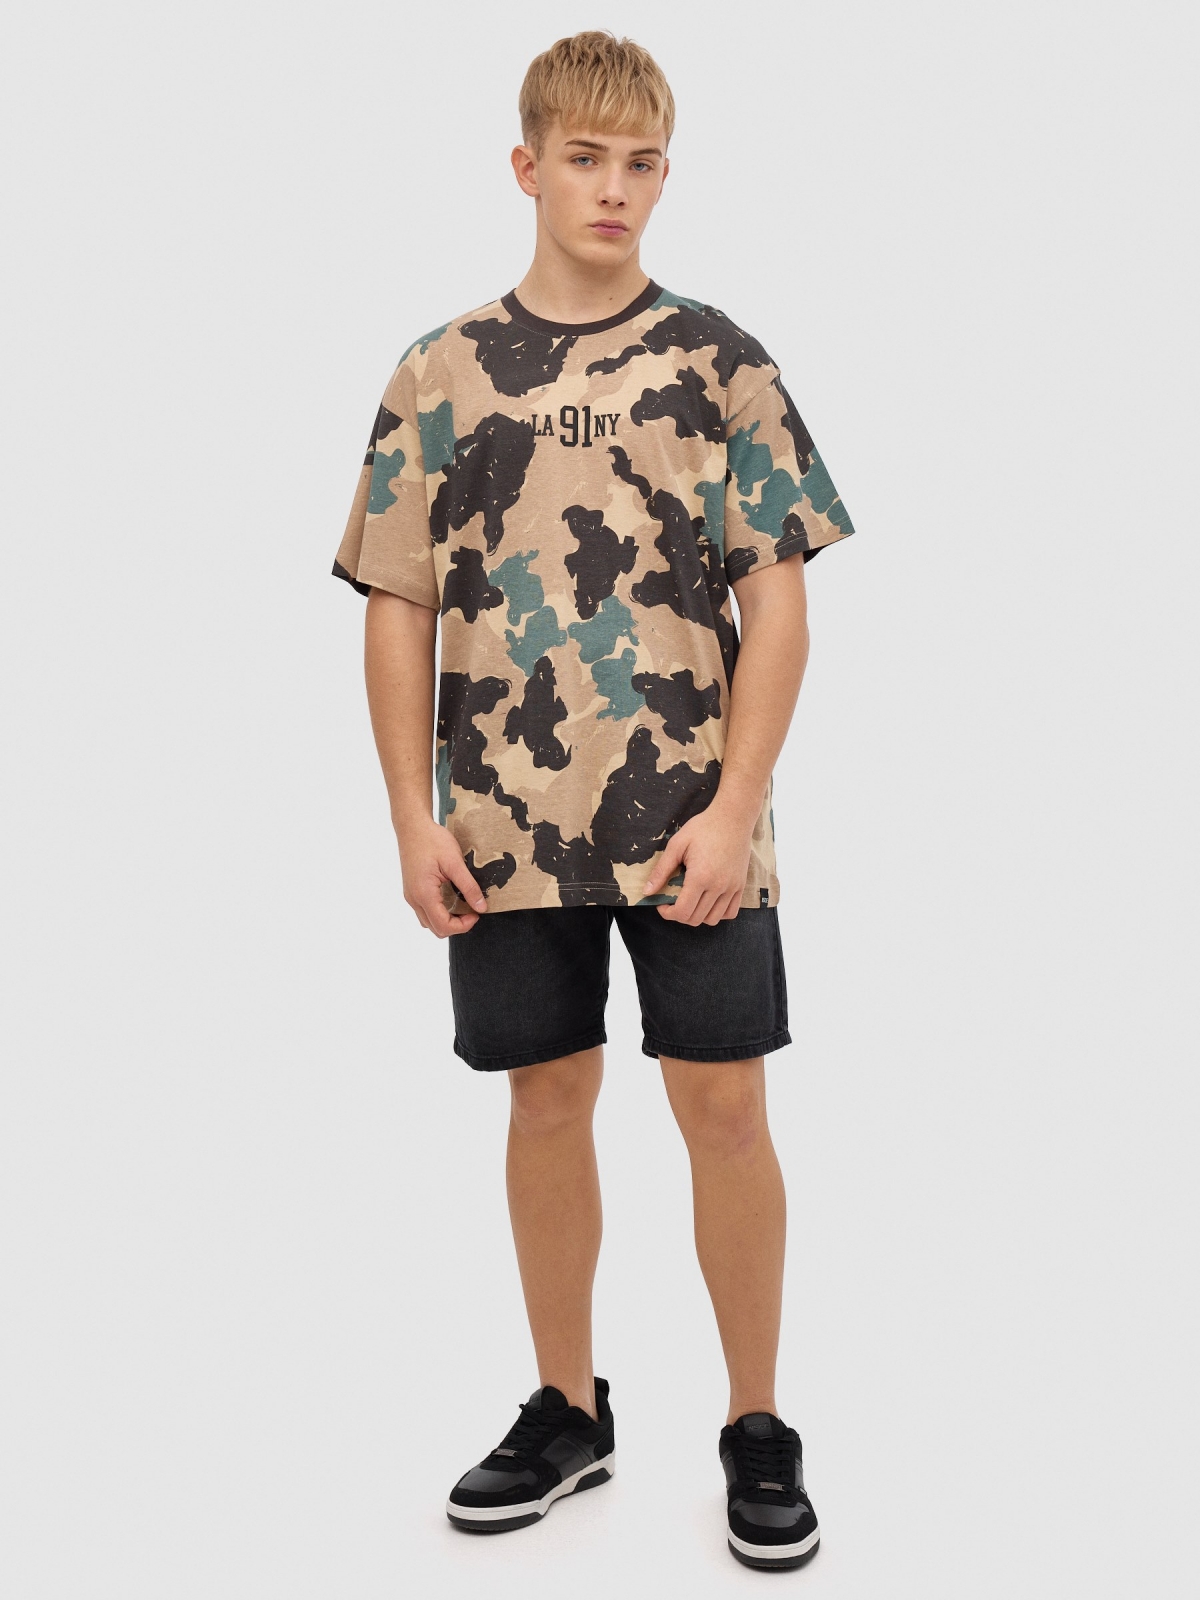 NY camouflage T-shirt sand front view